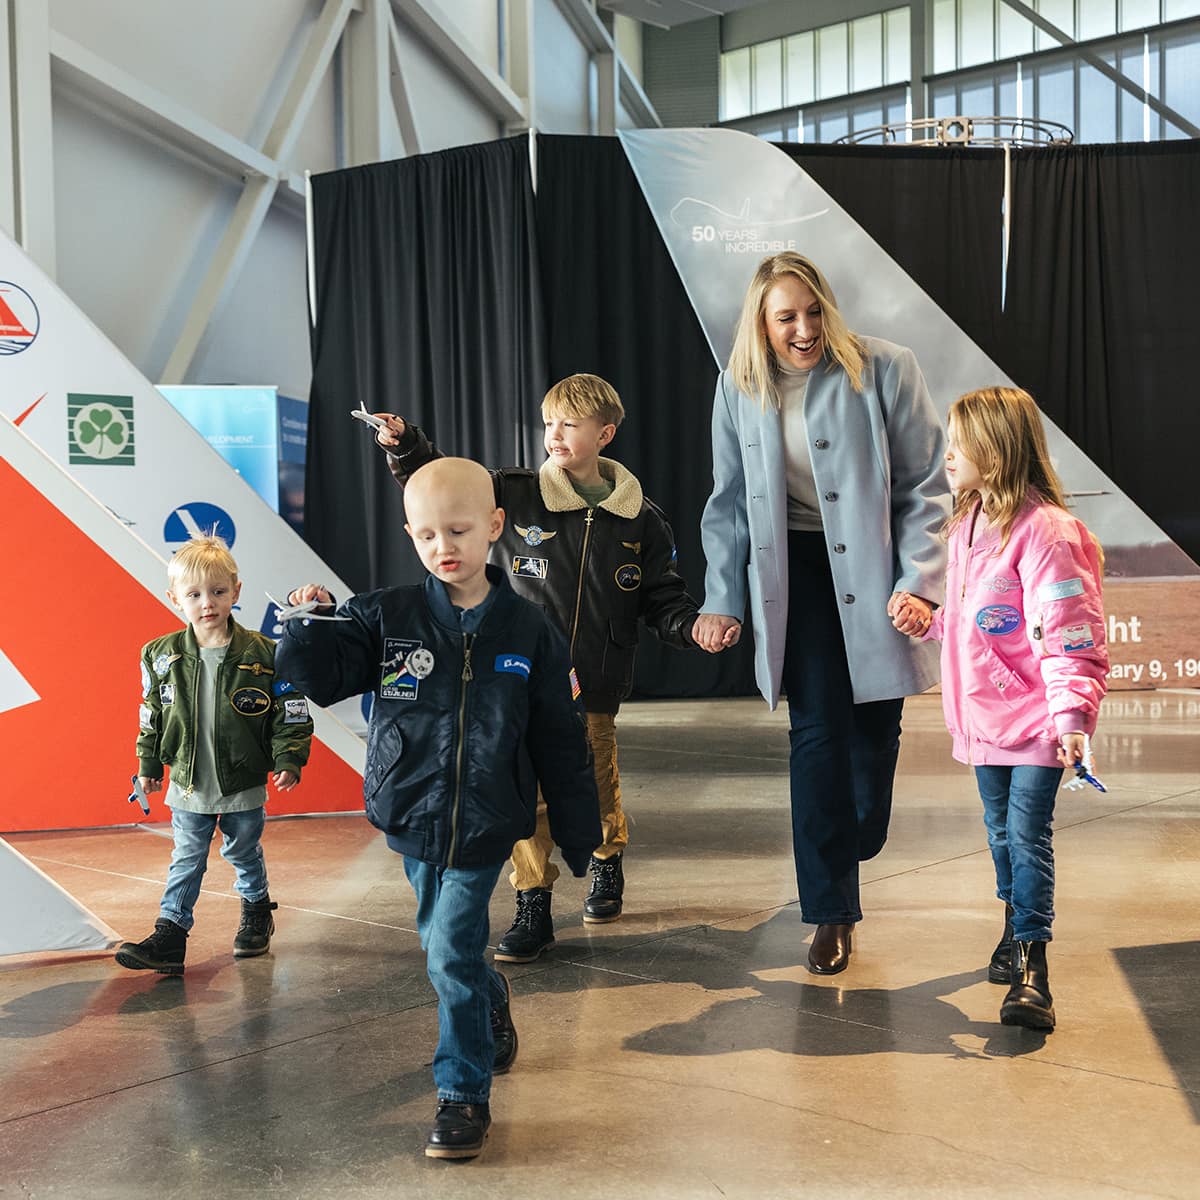 Rachelle Strong and her four children enjoy a light moment while visiting the Boeing Future of Flight Museum in Everett, Washington.